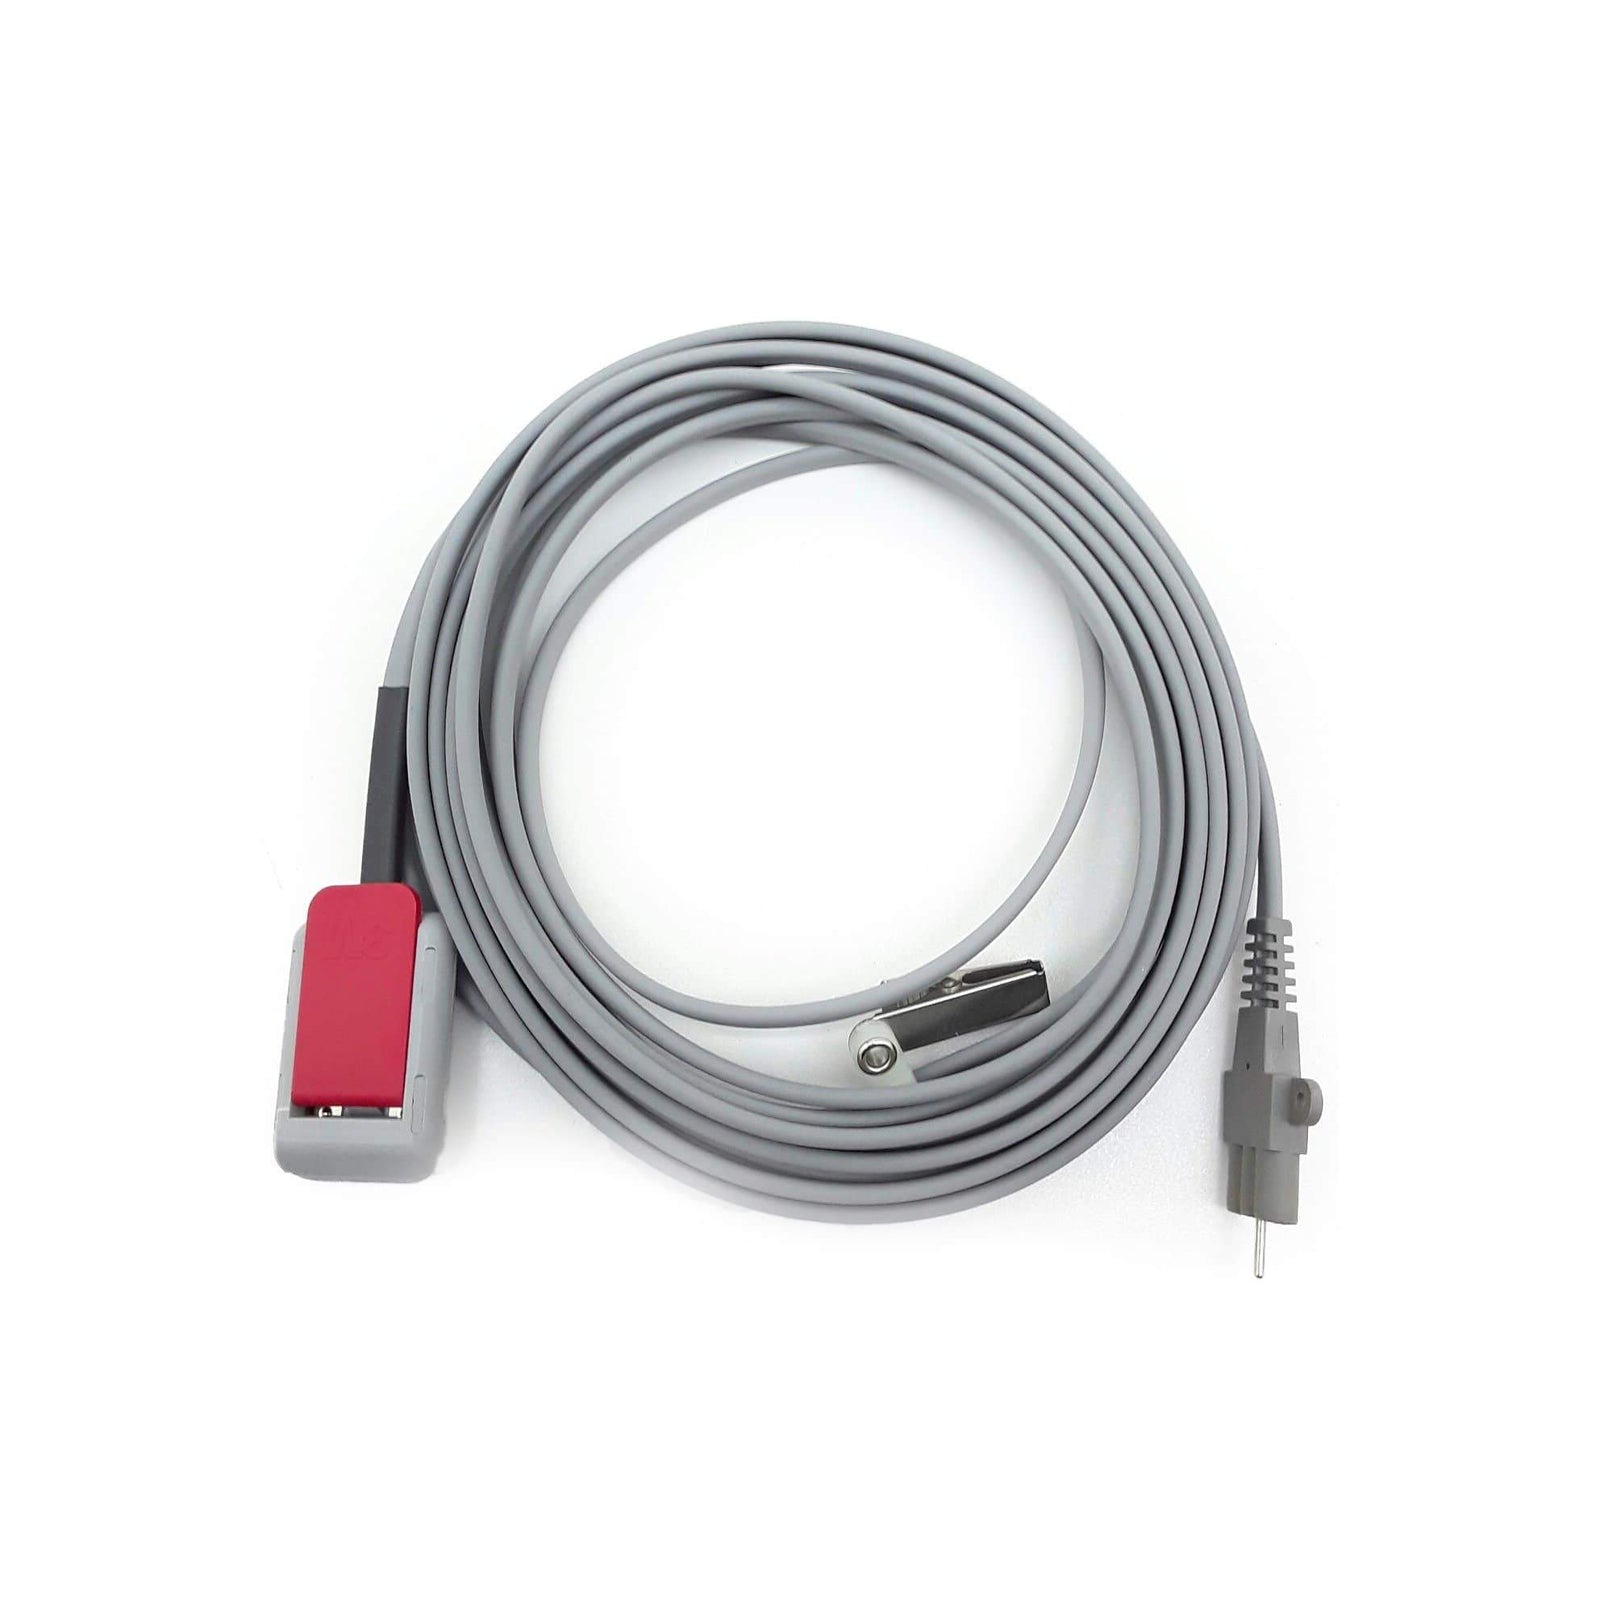 3M Electrosurgical Grounding Cable